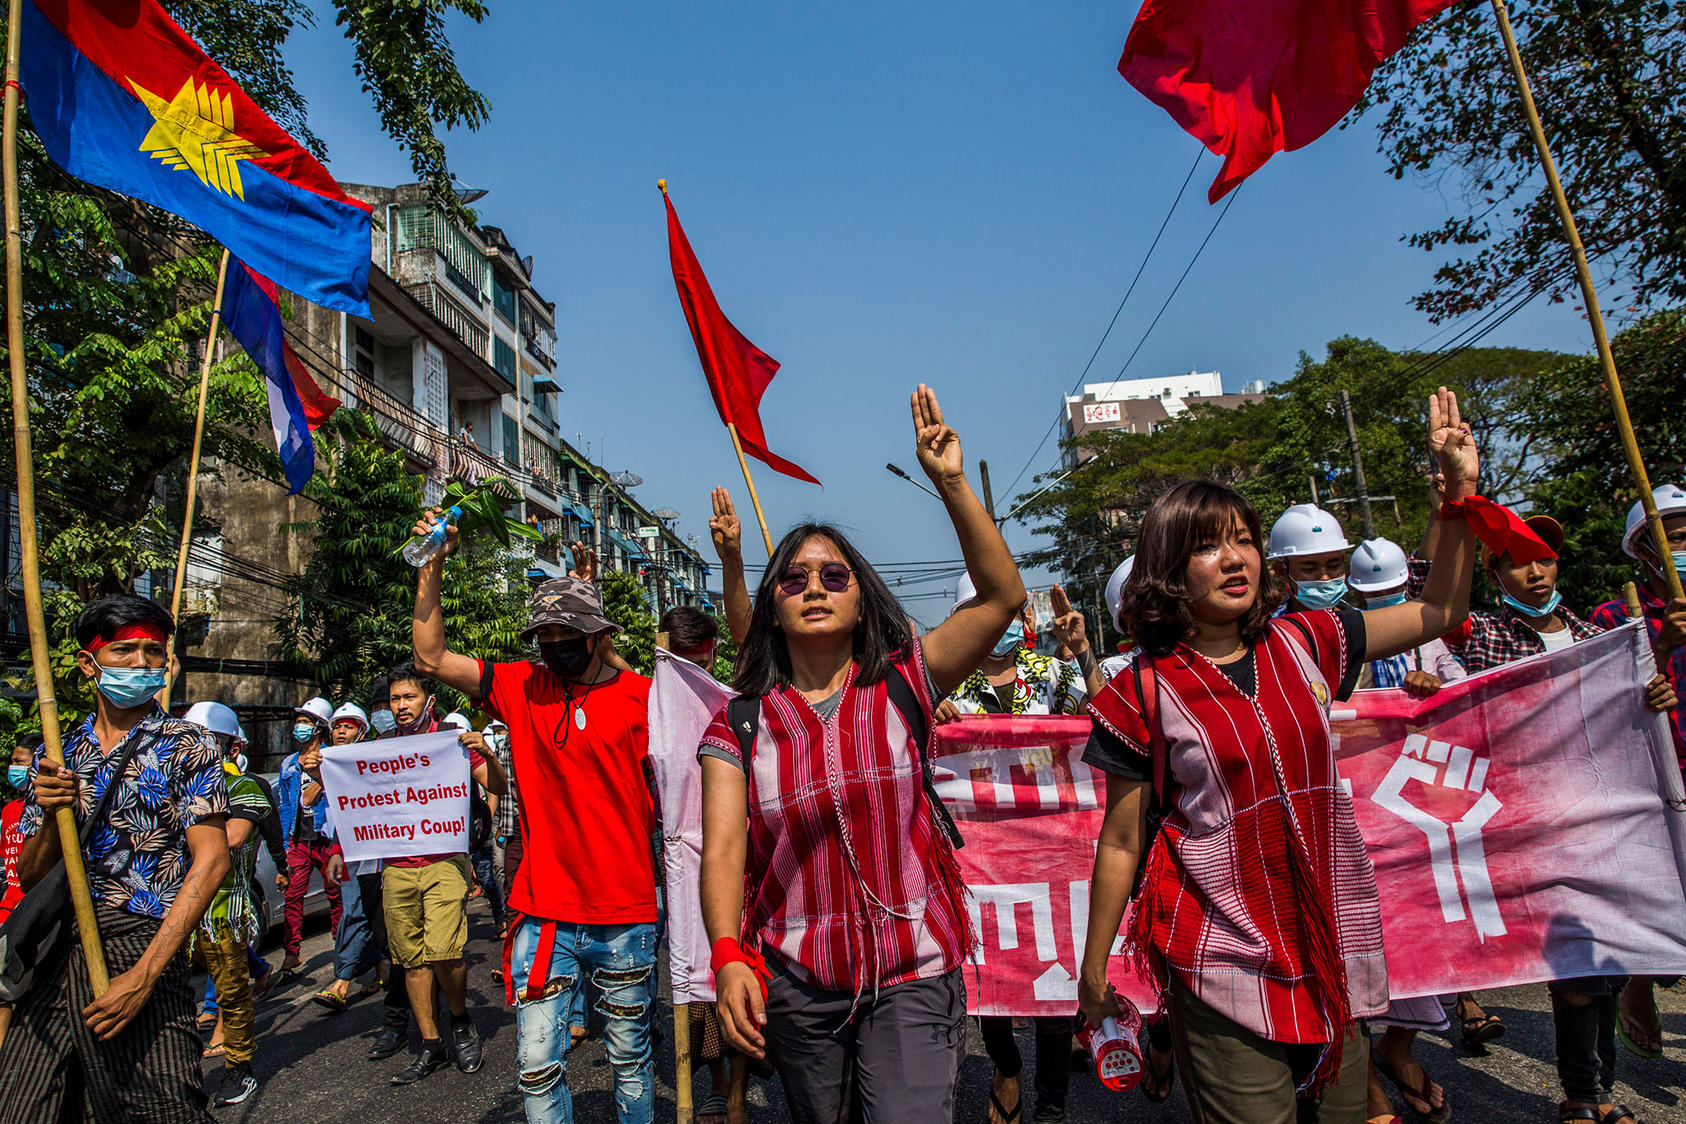 Esther Ze Naw and Ma Ei Thinzar Maung lead a rally to protest the recent military coup, in Yangon, Myanmar, Feb. 6, 2021. Despite the danger, women have been at the forefront of the protest movement, rebuking the generals who ousted a female civilian leader. (The New York Times) 